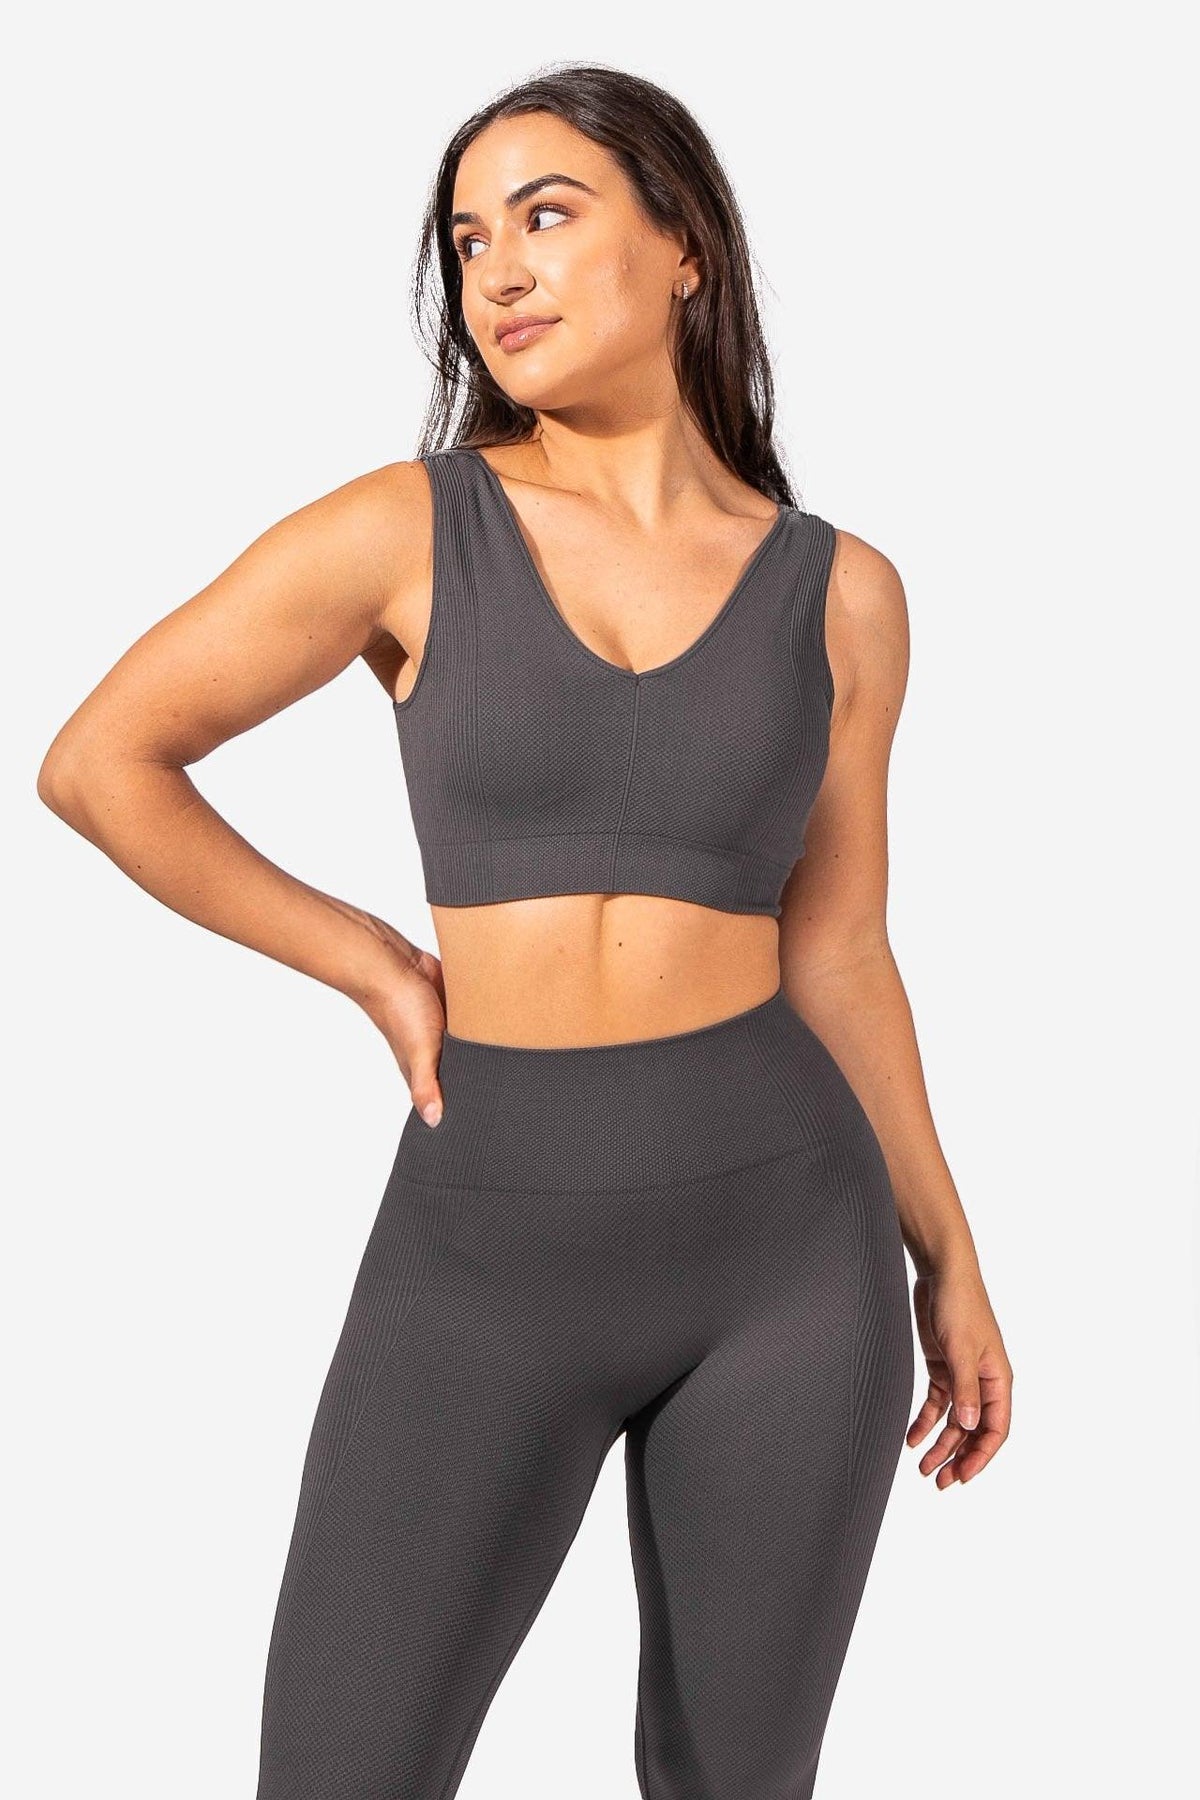 Jed North Luxe Sports Bra - Olive Green